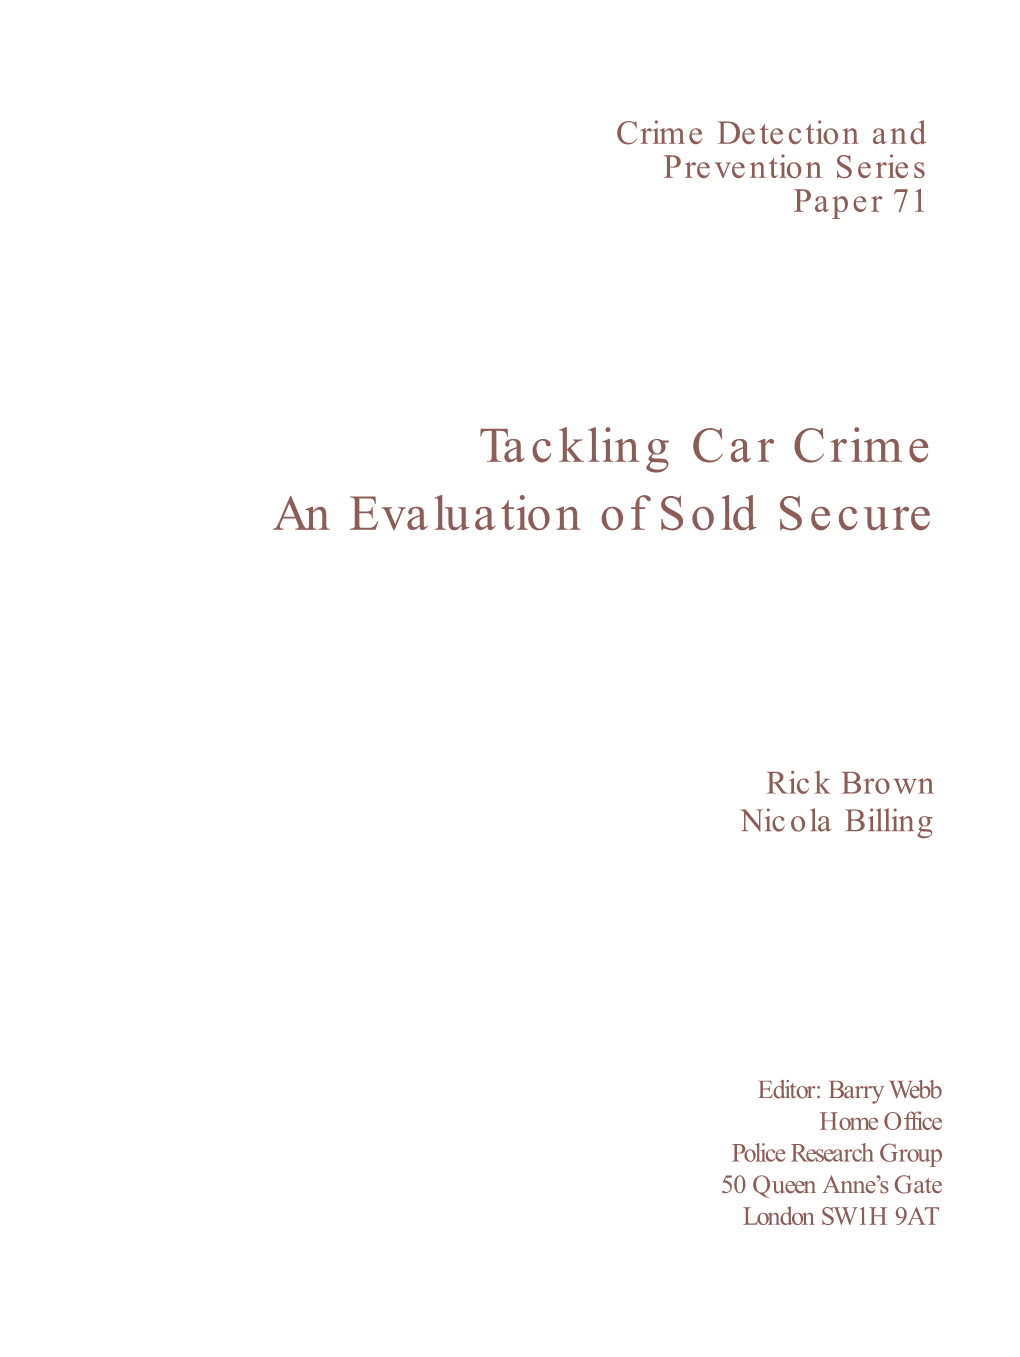 Tackling Car Crime an Evaluation of Sold Secure